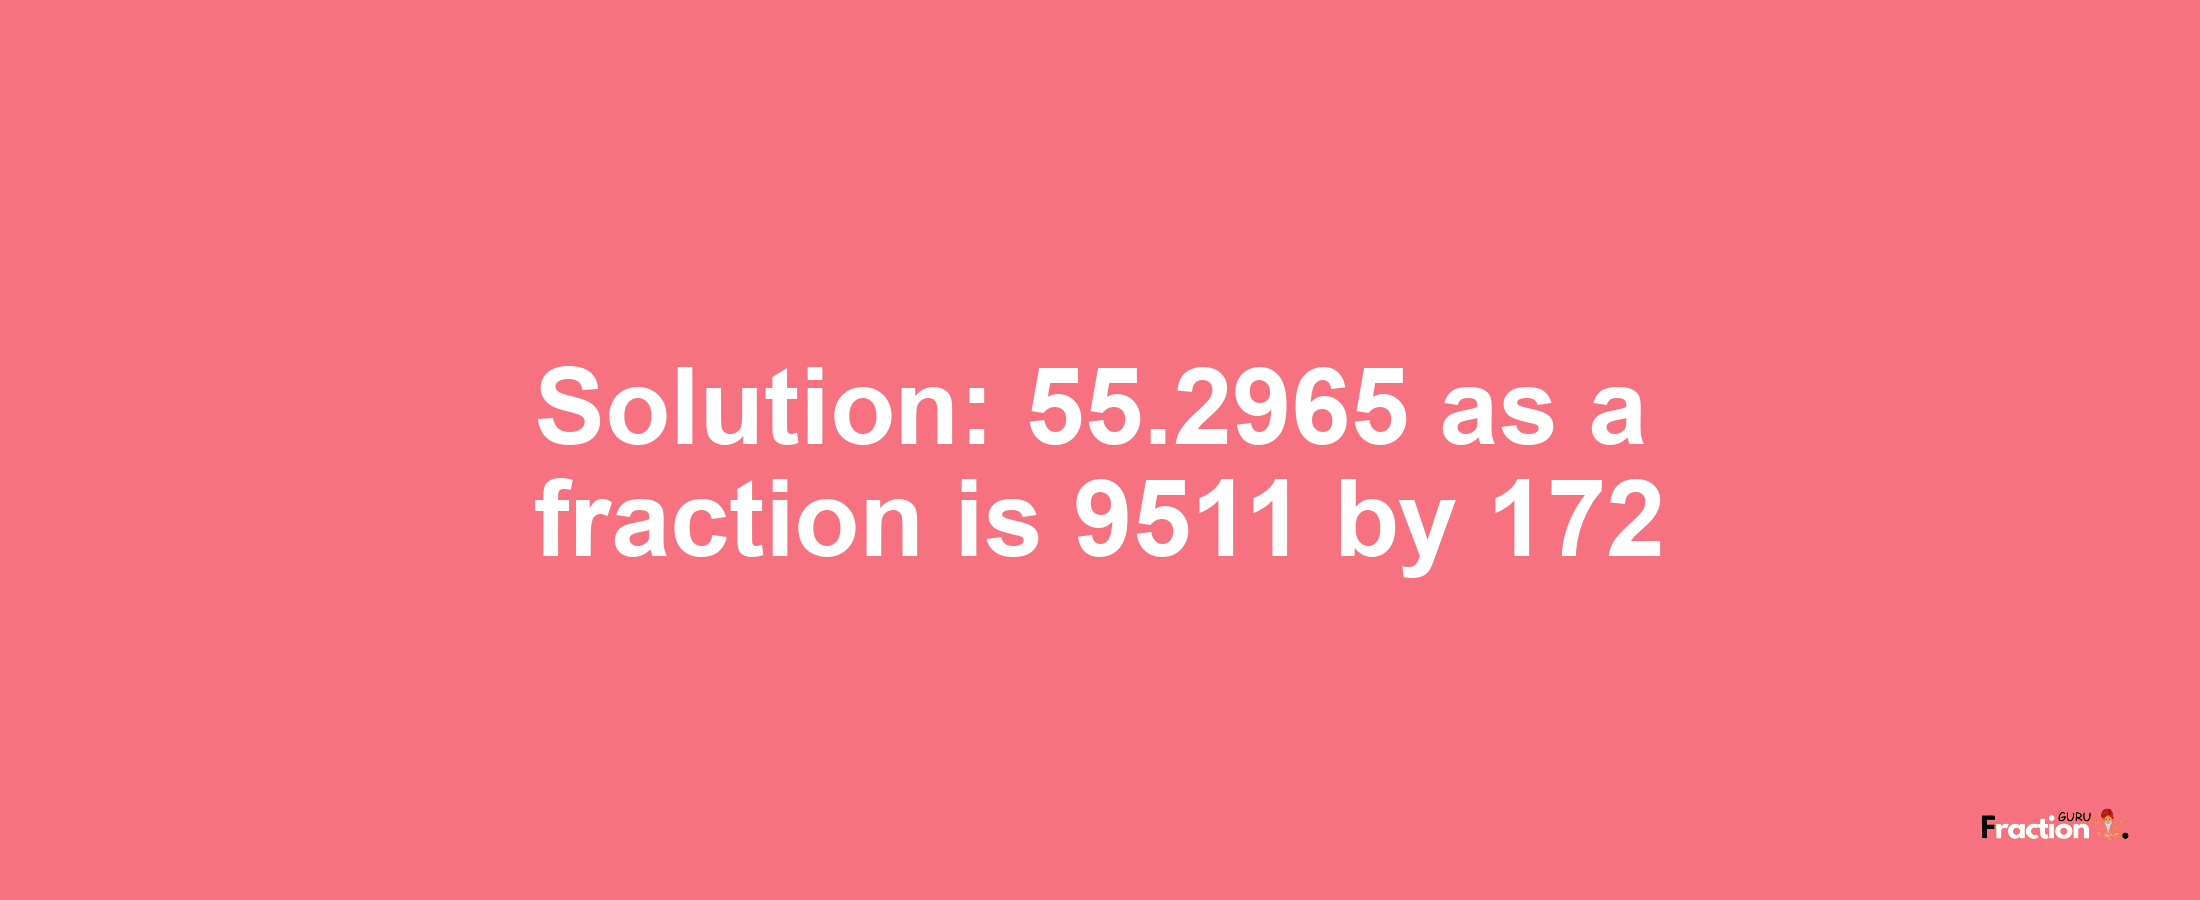 Solution:55.2965 as a fraction is 9511/172